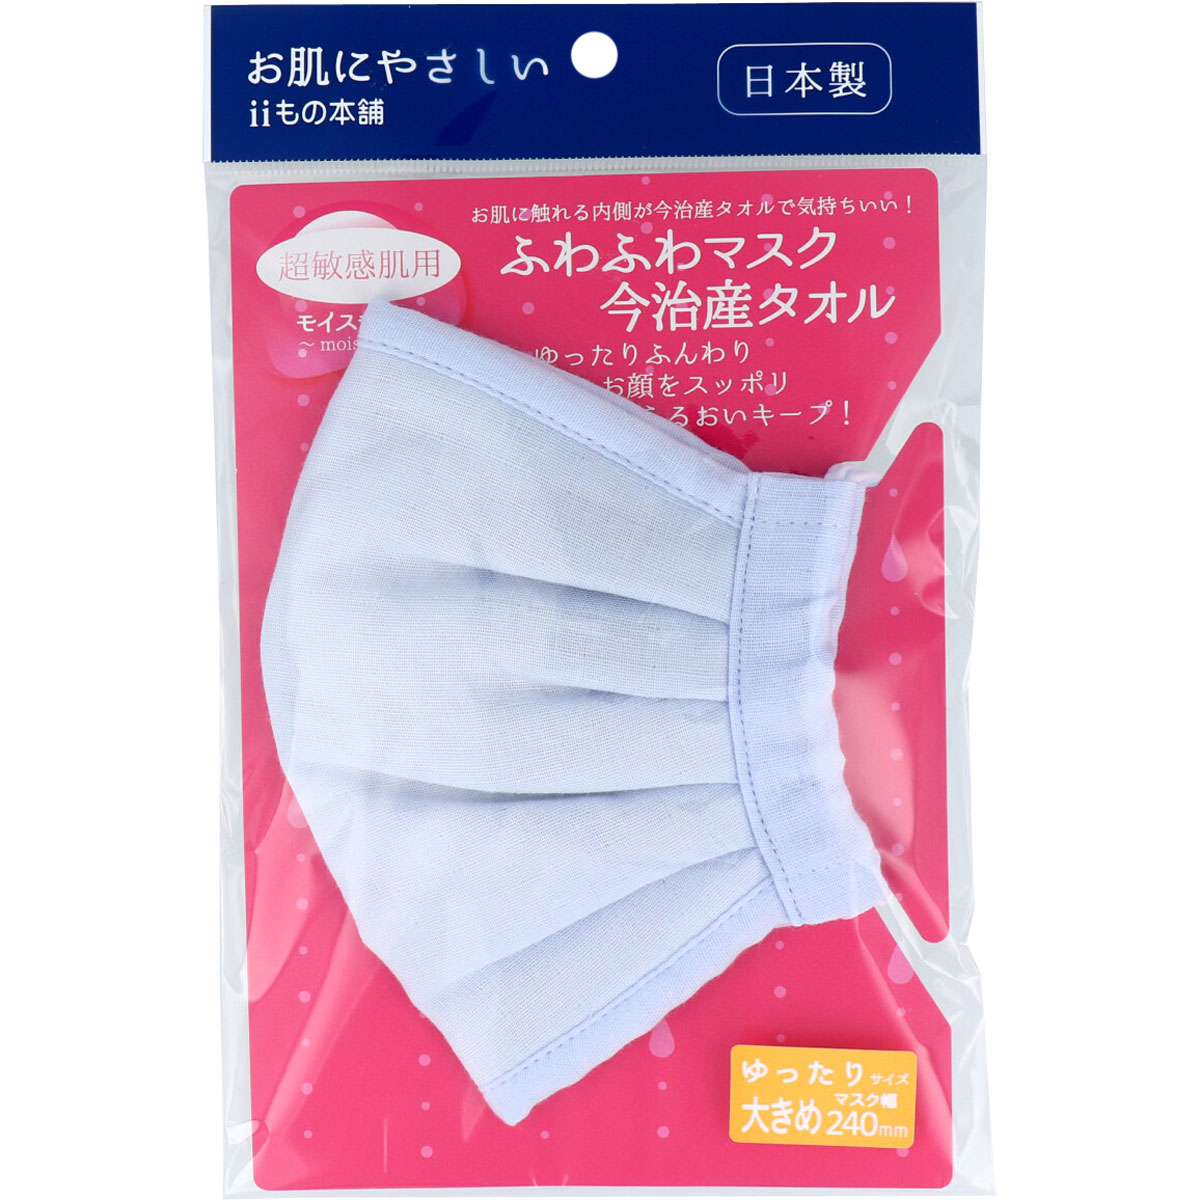 Picture of Light Blue color Fluffy Mask Using Imabari Towel